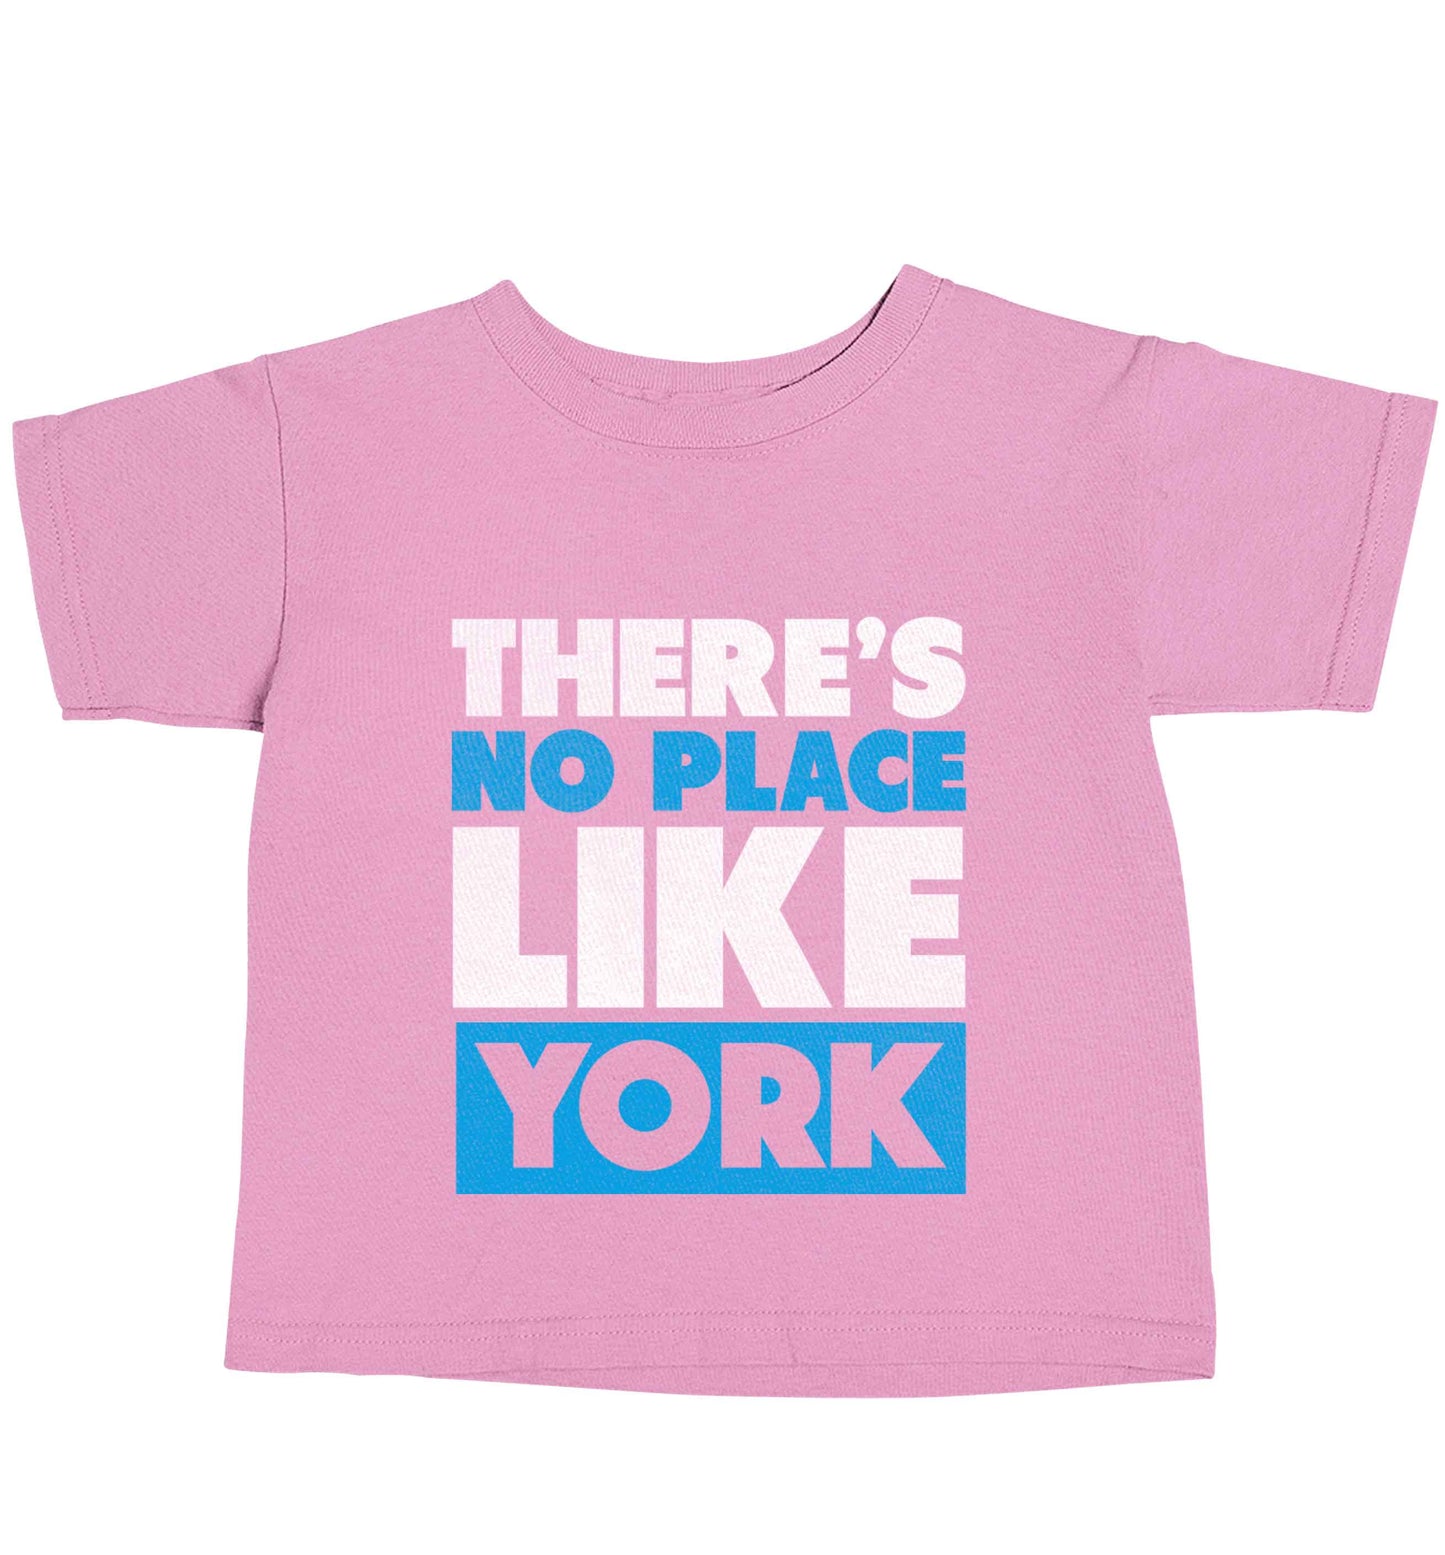 There's no place like york light pink baby toddler Tshirt 2 Years